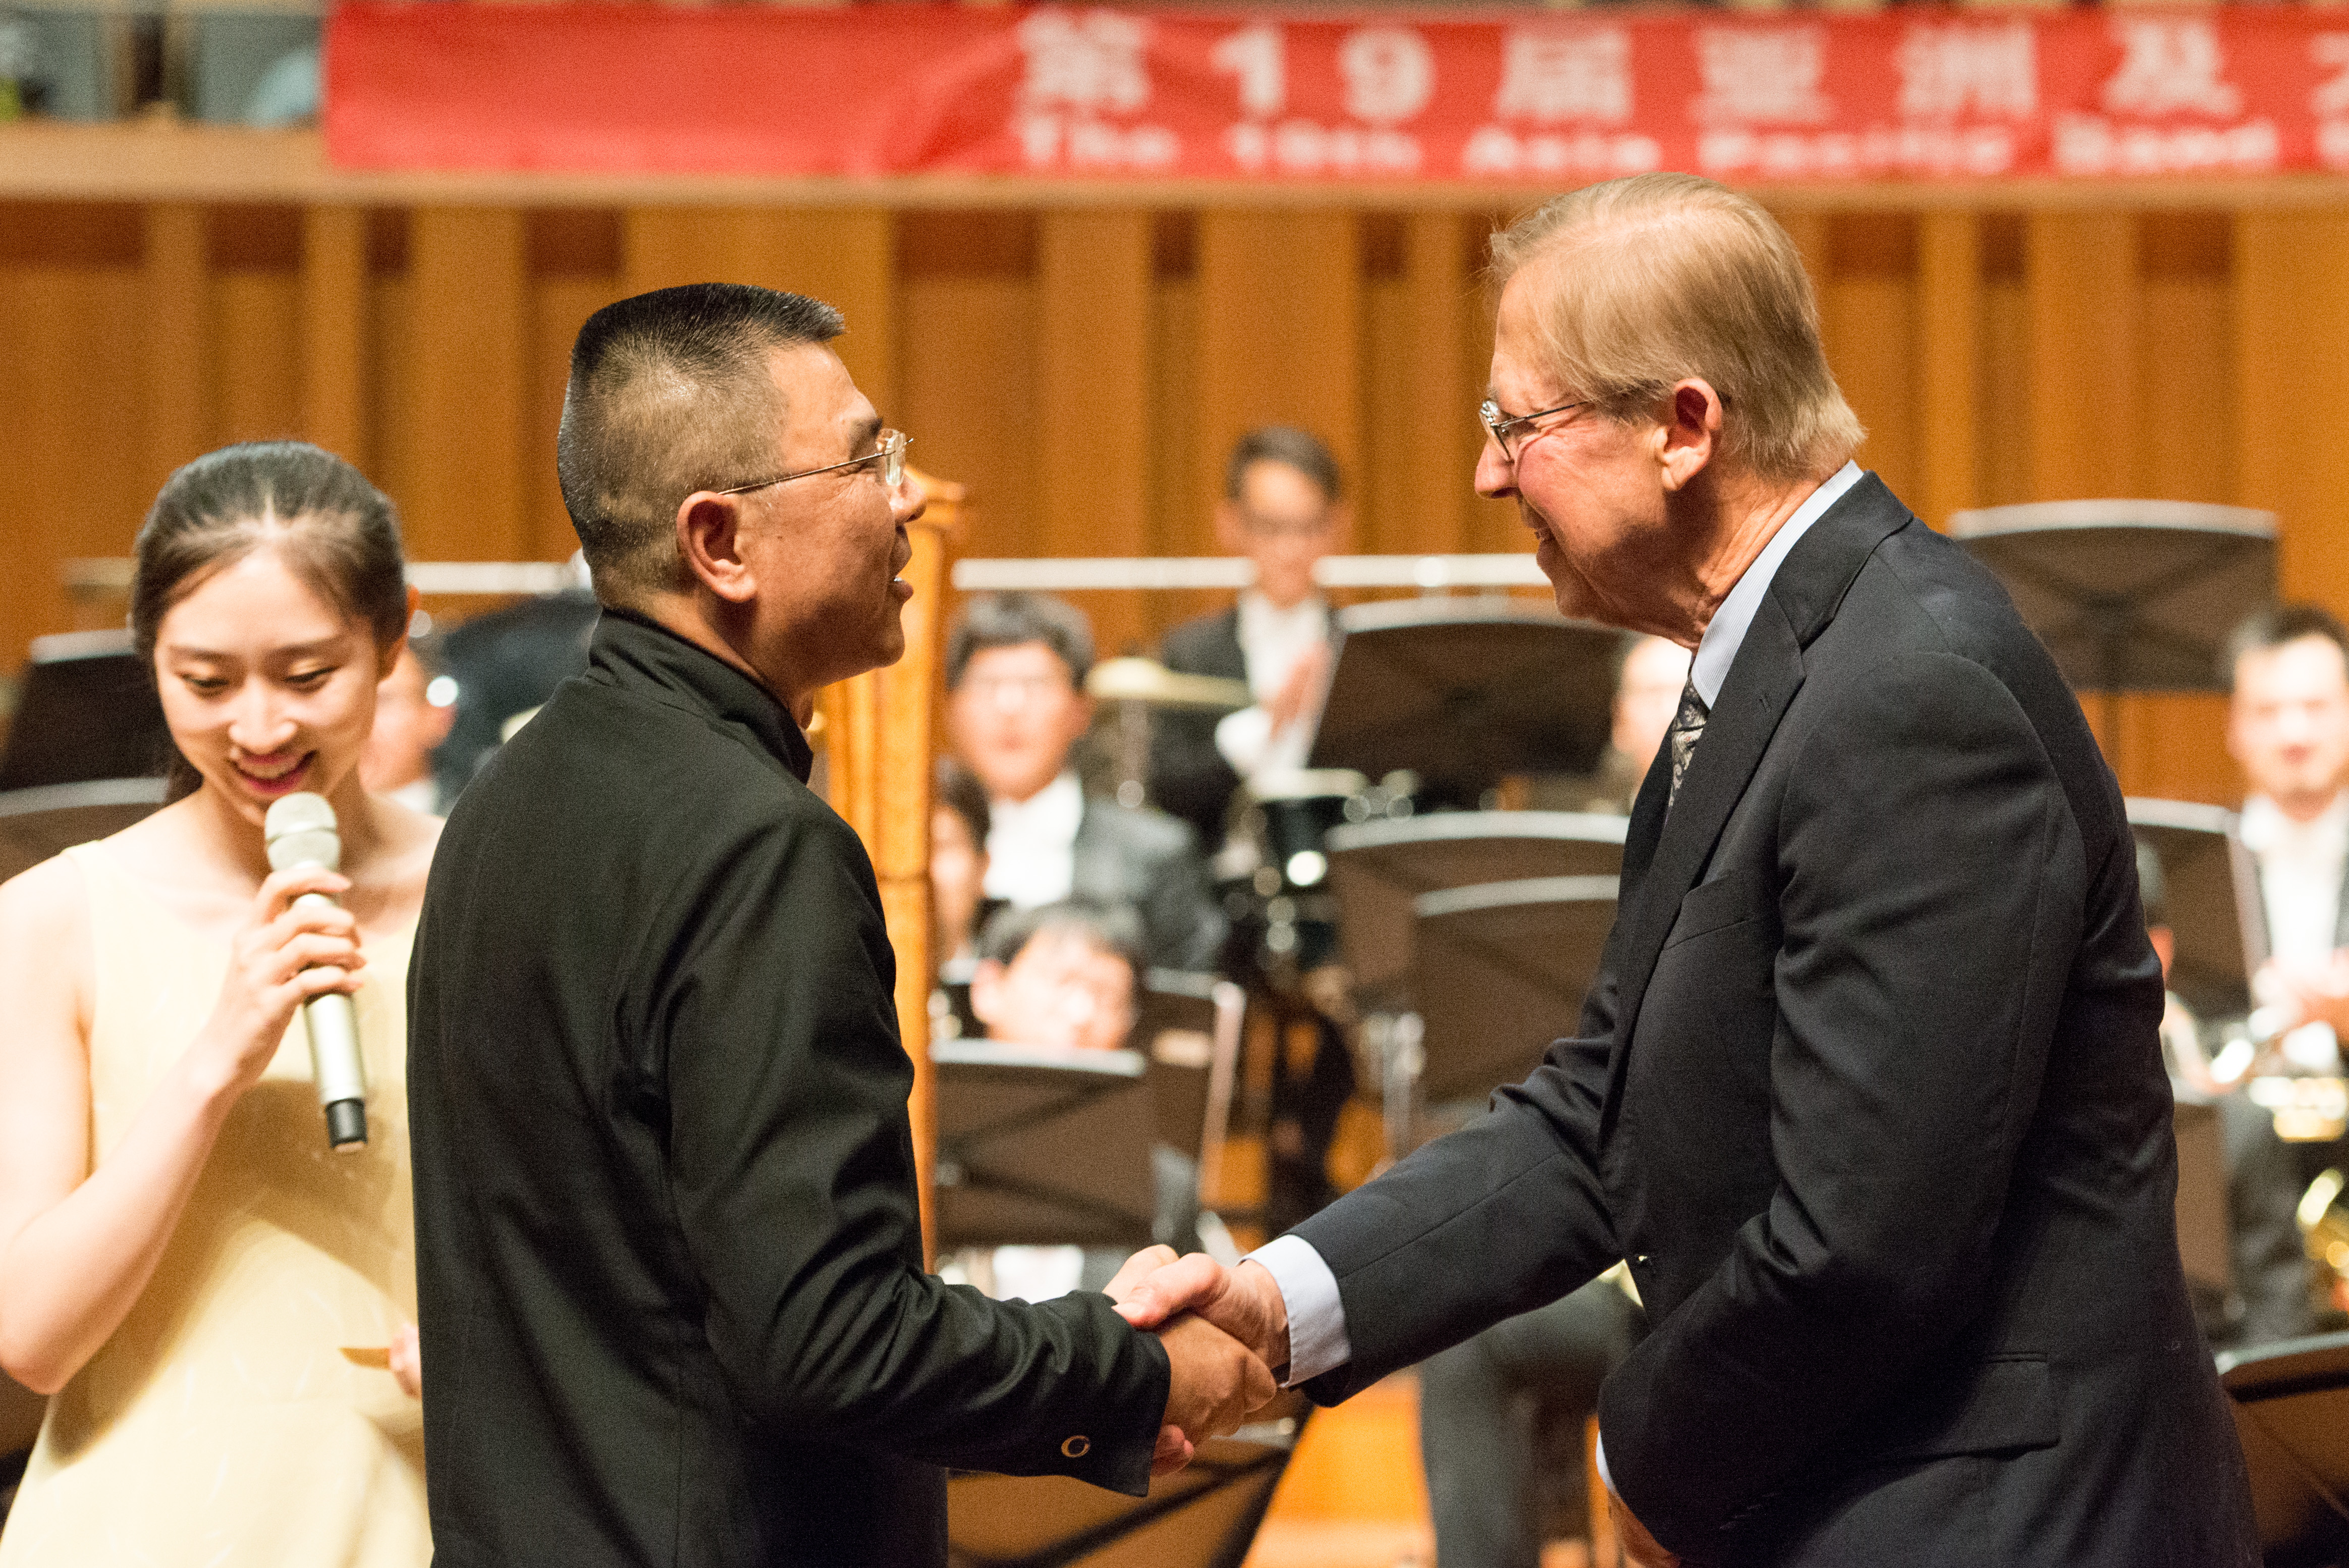 David Maslanka shakes Li Fangfang's hand after a performance of Symphony No. 4 by the Beijing Wind Orchestra at the National Center for the Performing Arts.